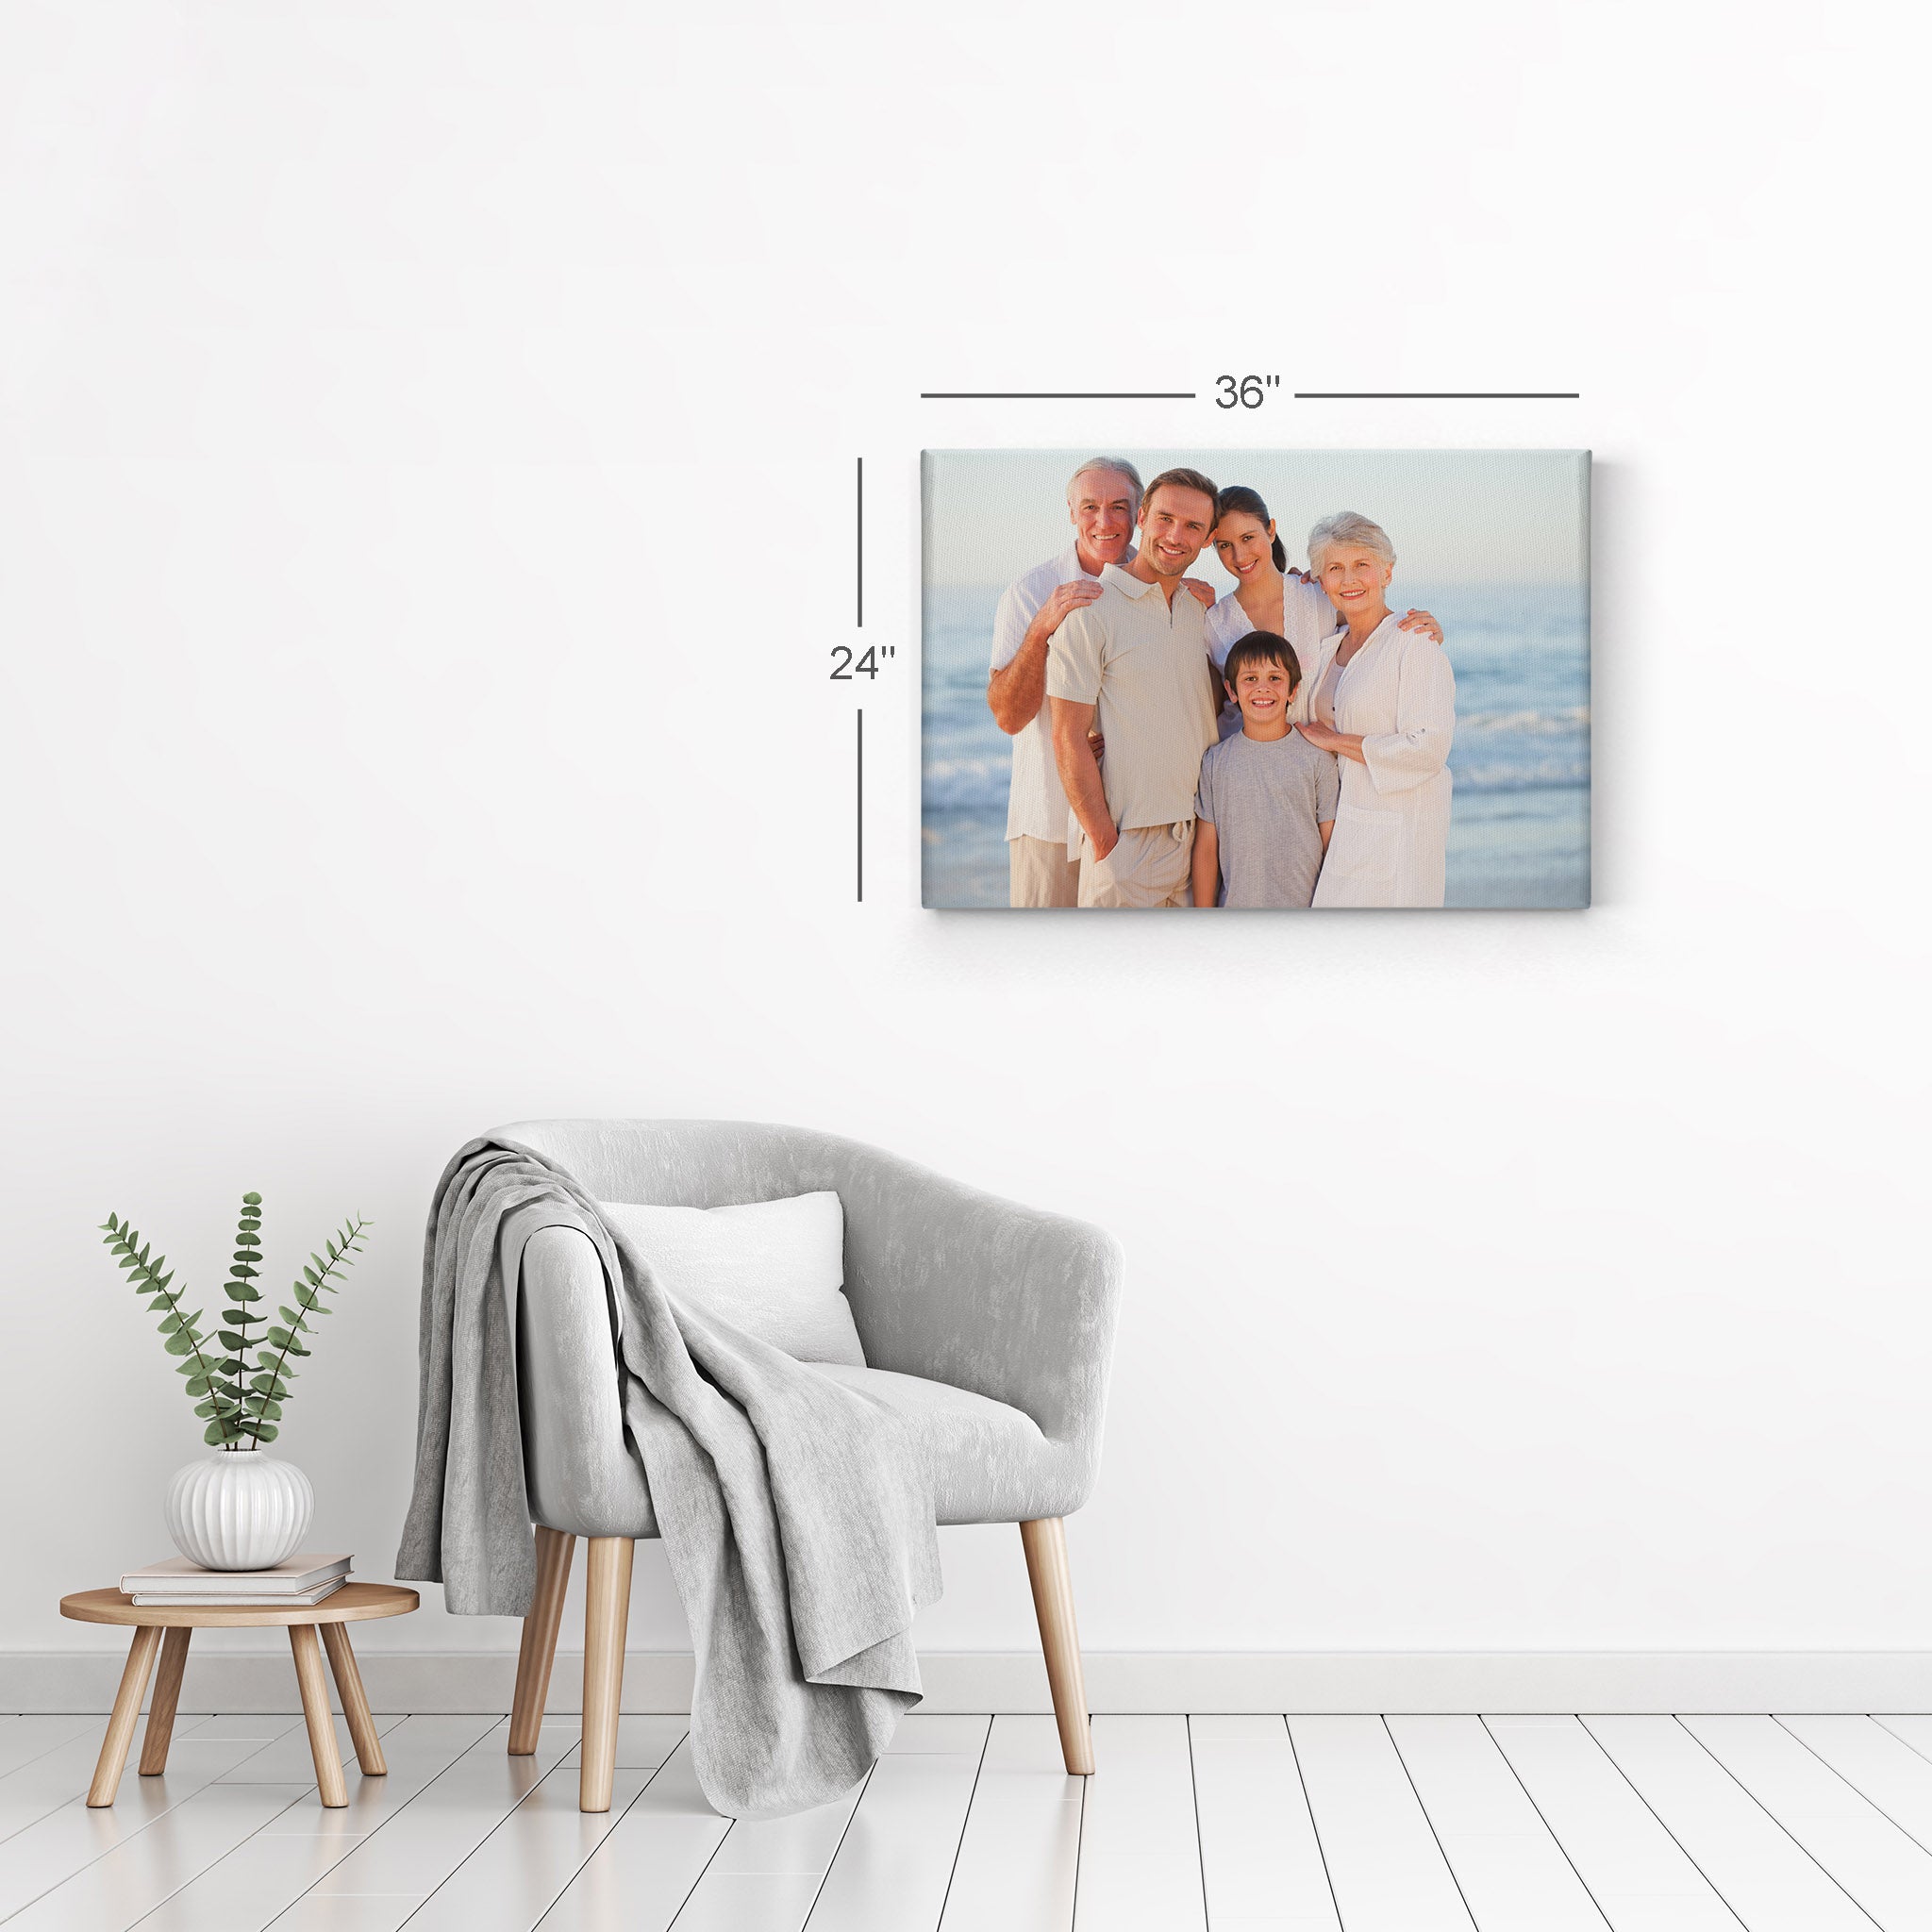 Personalized Photo to Canvas Print Wall Art 16 X20 (40Cmx50Cm) Custom Your Photo on Canvas Wall Art Digitally Printed